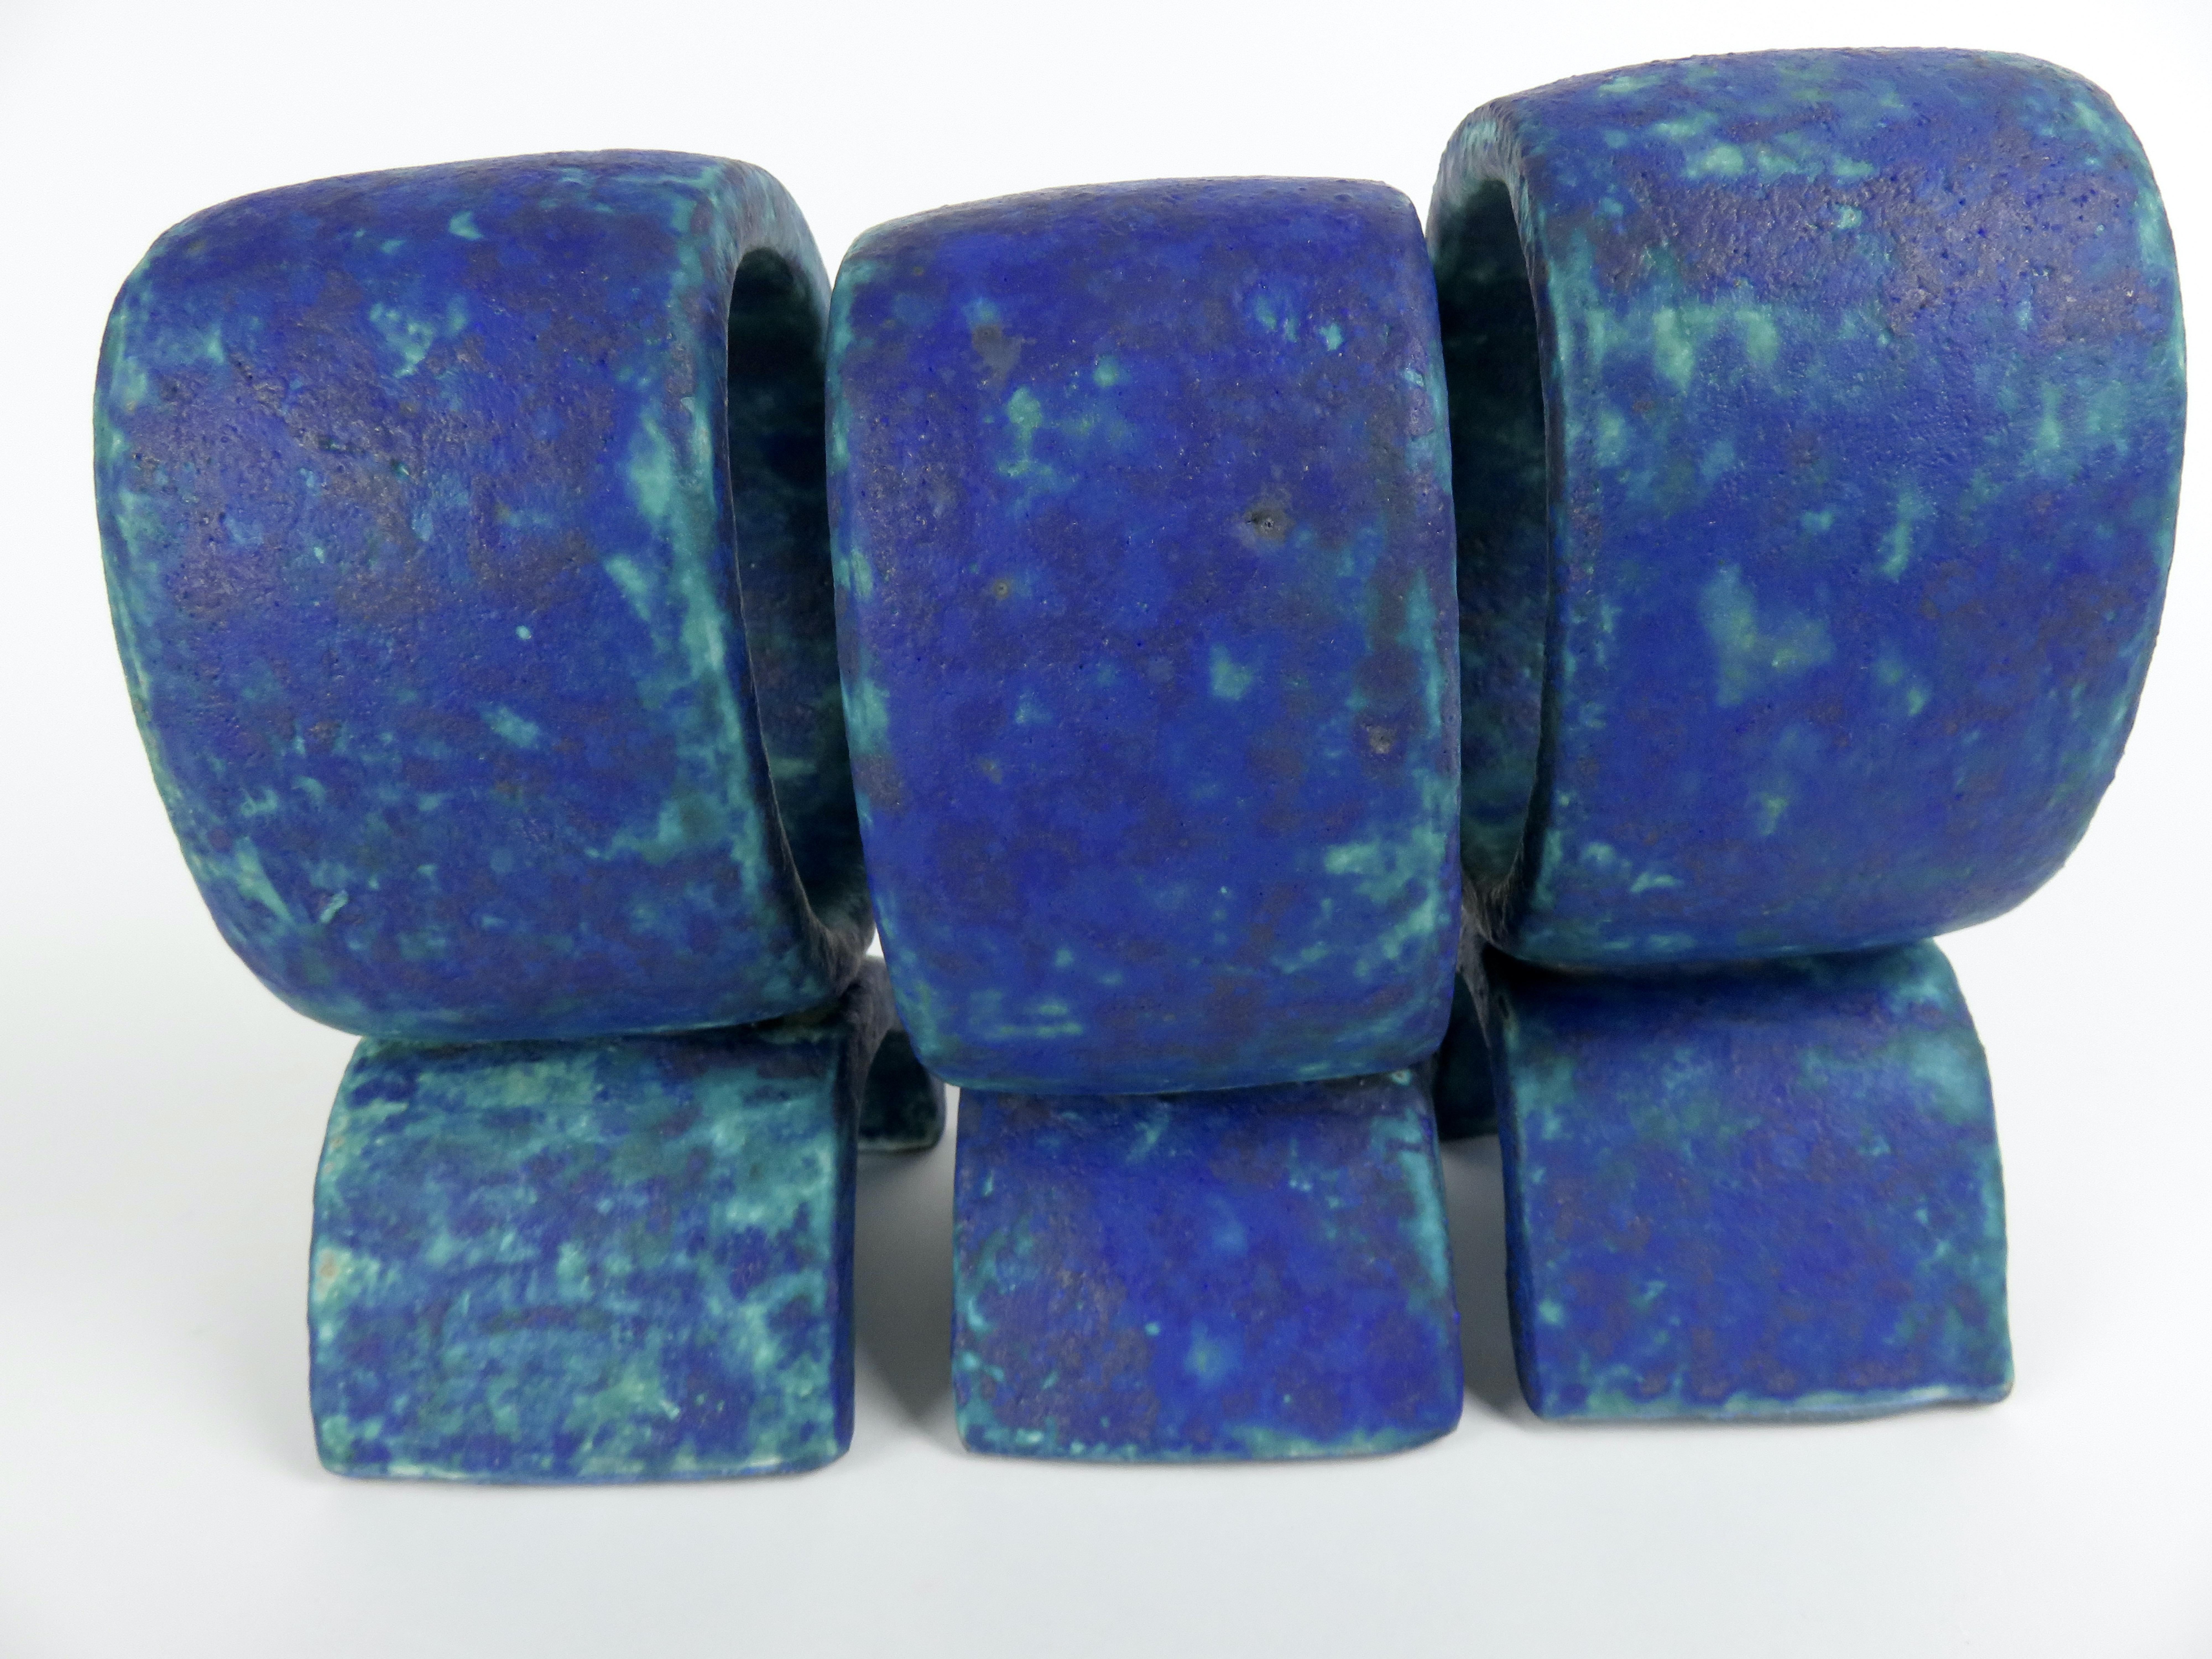 Glazed Mottled Turquoise and Deep Blue, 3 Ceramic Totems, Single Rings on Curved Legs For Sale